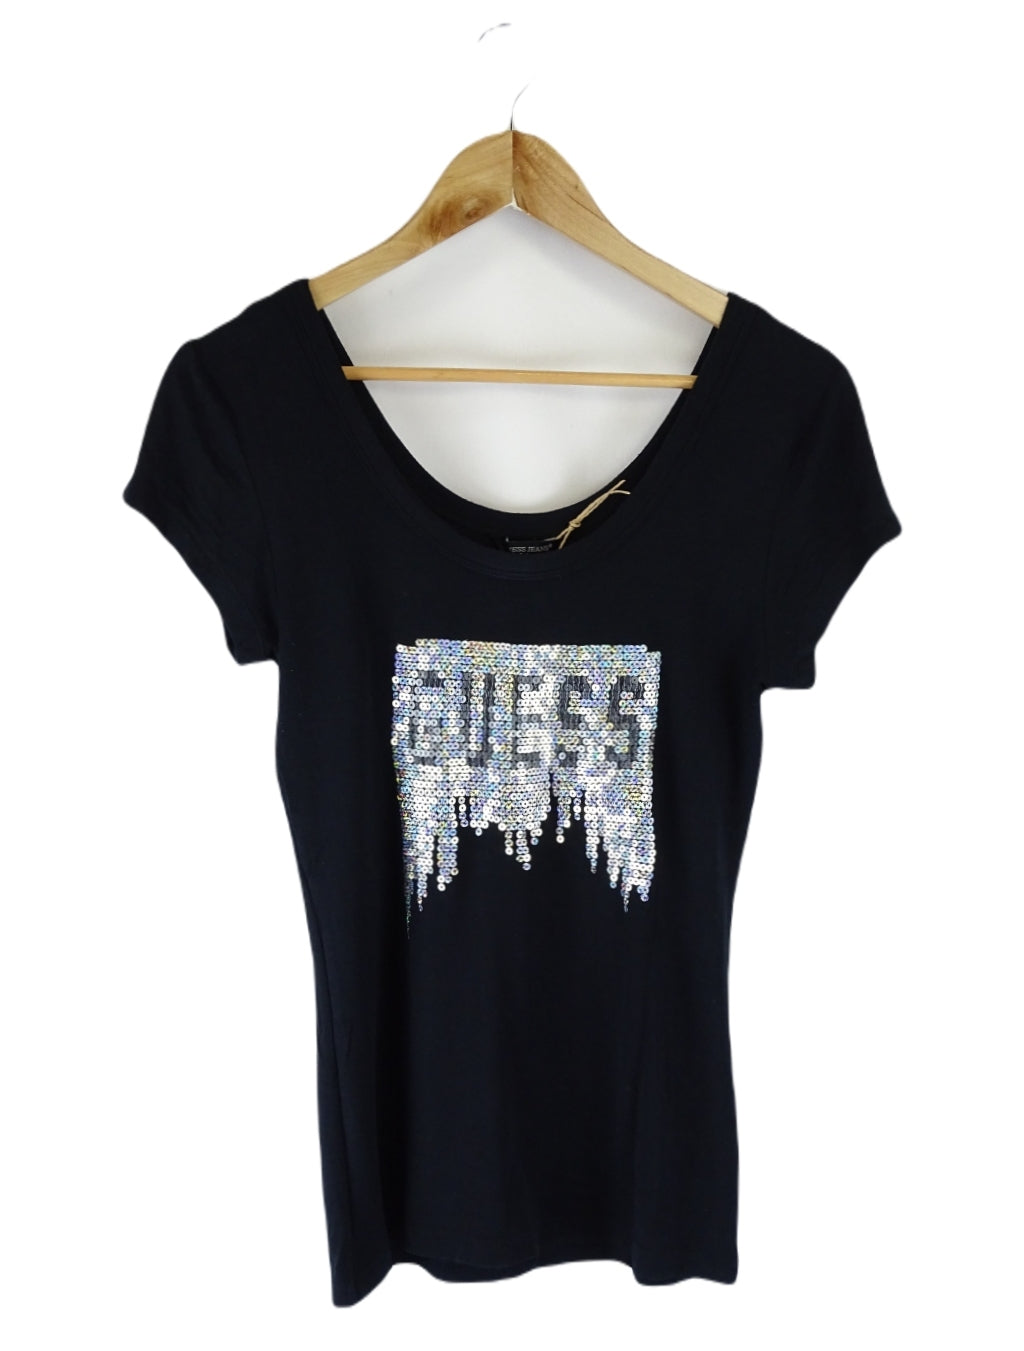 Guess Black And Silver Sequin Top L